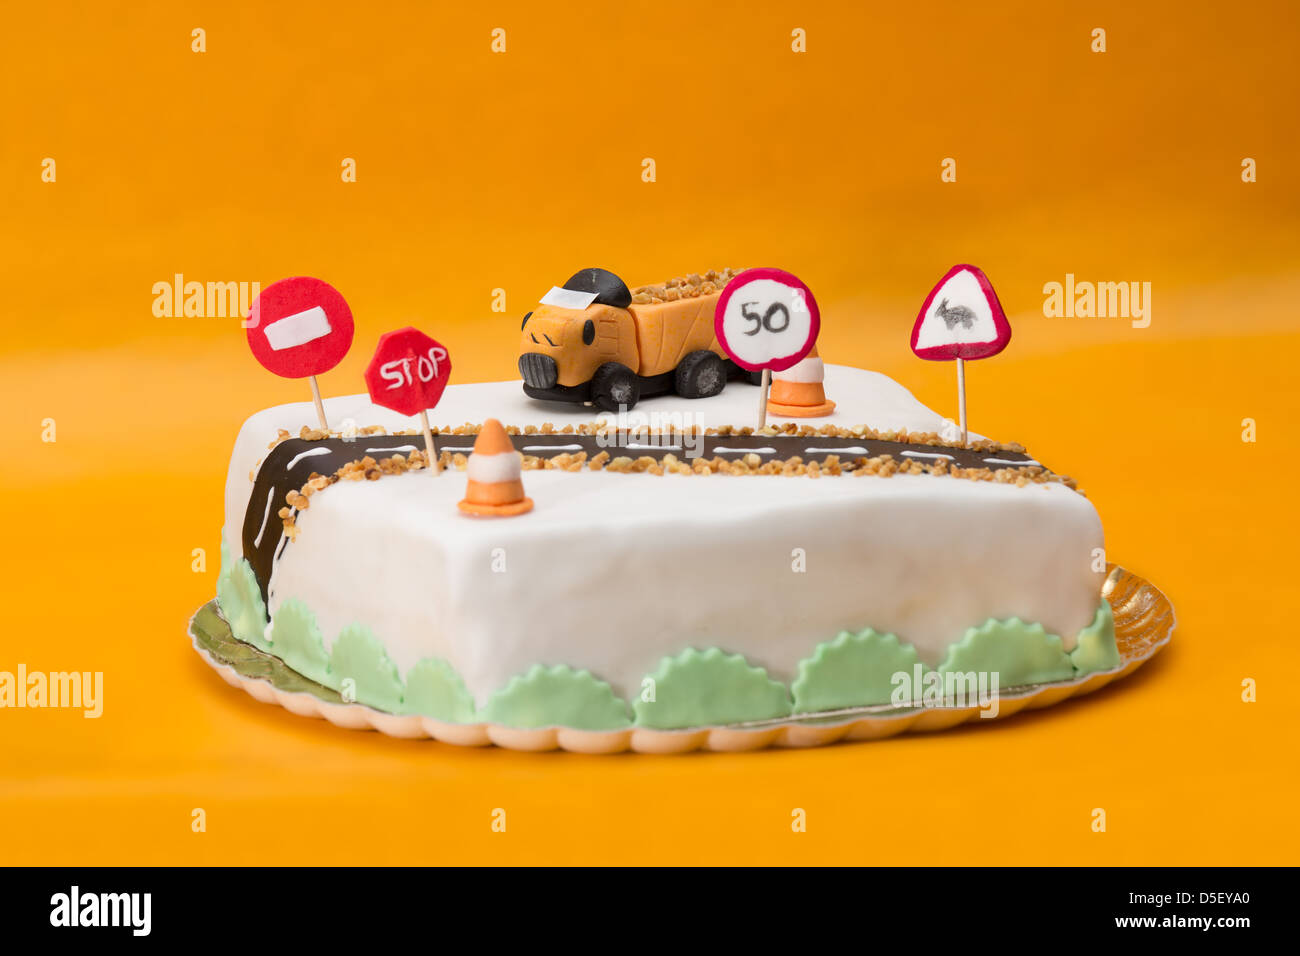 Two tier tall cake with fondant truck and road decoration on orange  background Stock Photo - Alamy